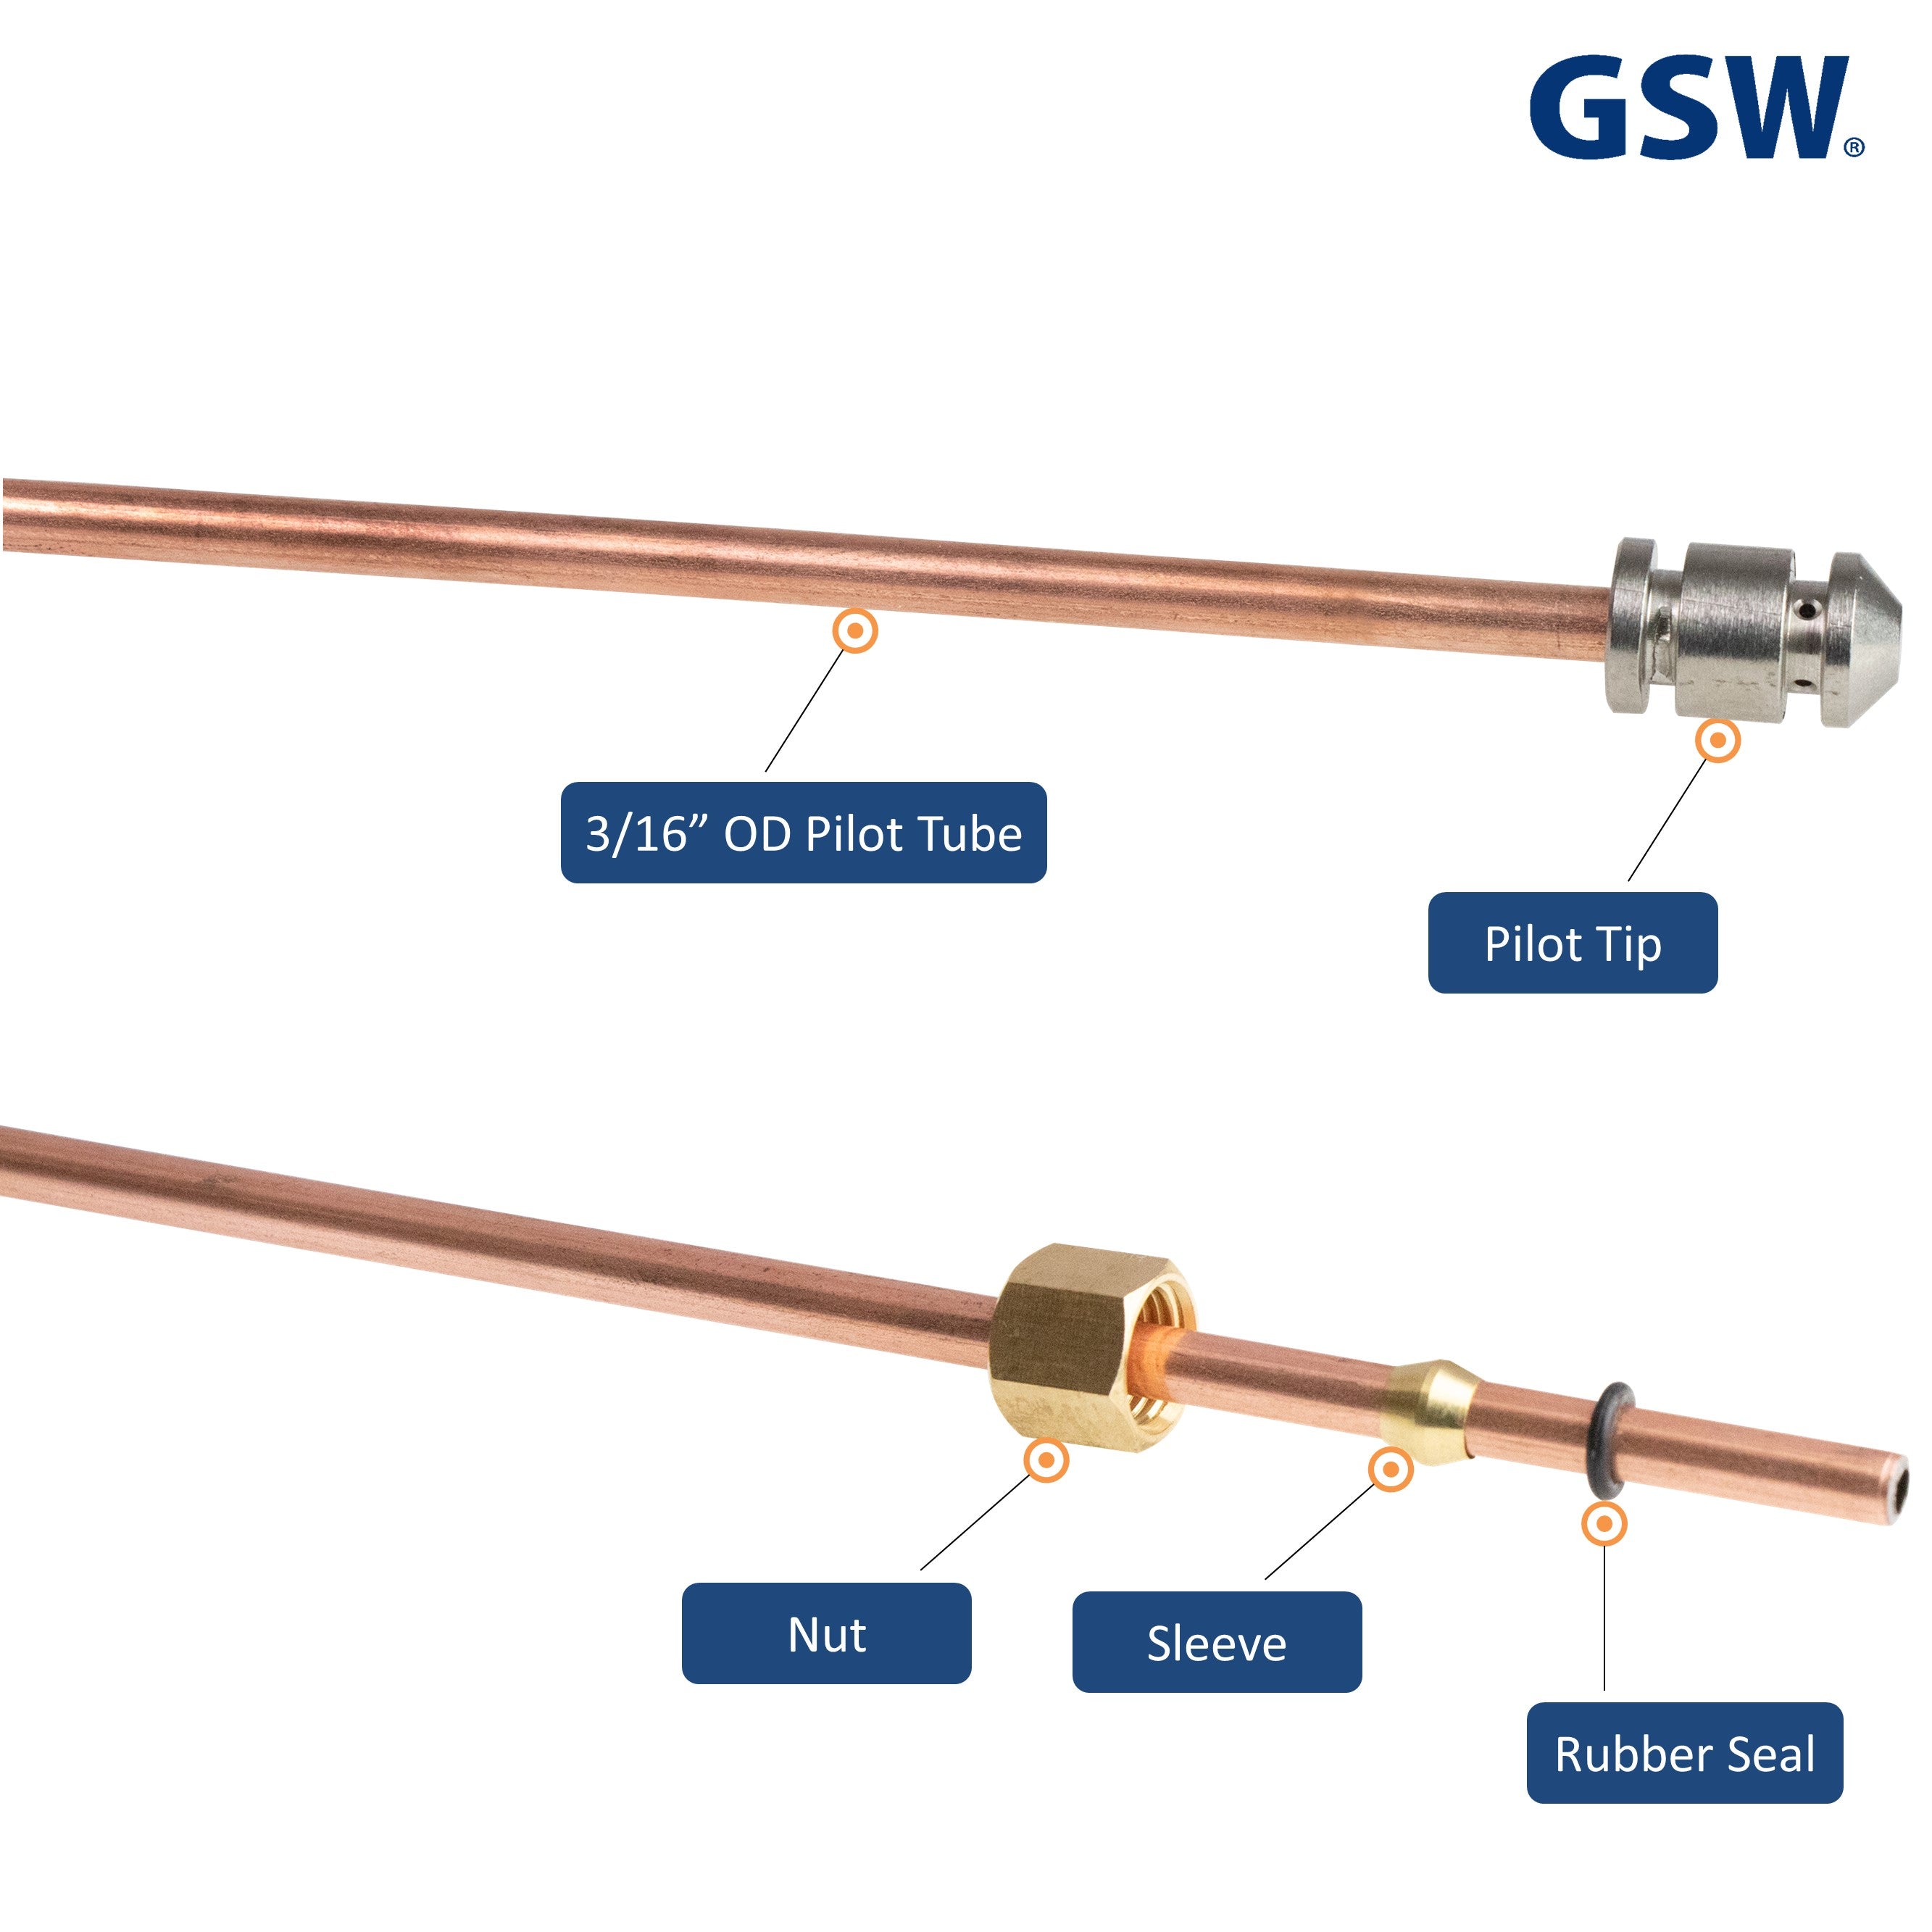 GSW WR-PTC 3/16"OD Bendable Pilot Tubing with Pilot Tip, Nut & Sleeve, Chinese Wok Range Accessory for Commercial Restaurant Kitchen Gas Equipment